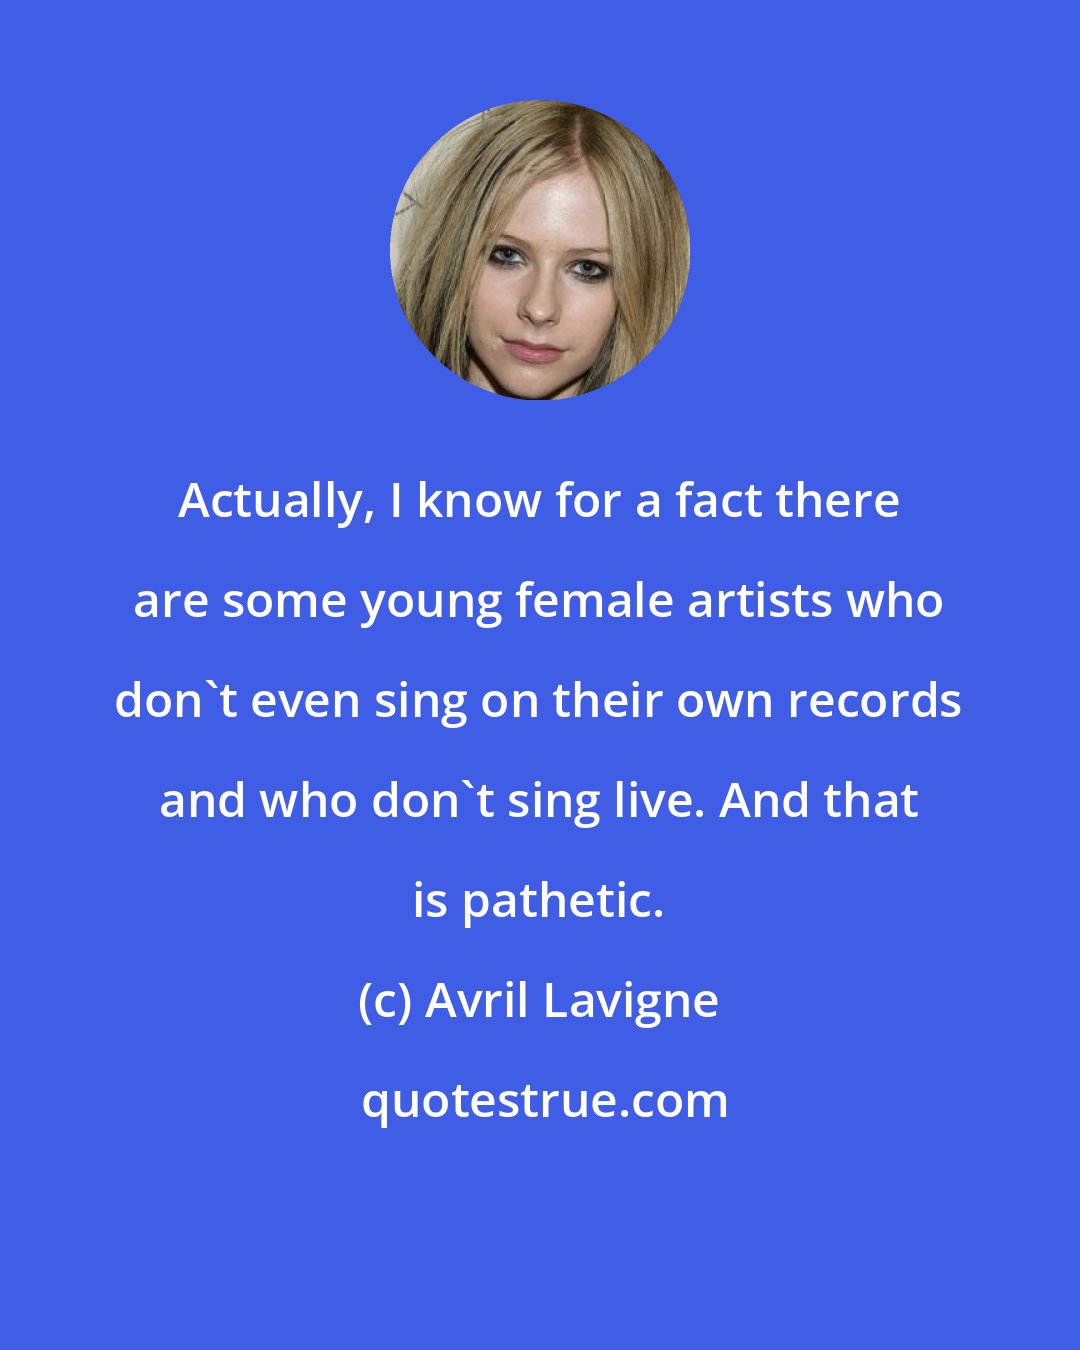 Avril Lavigne: Actually, I know for a fact there are some young female artists who don't even sing on their own records and who don't sing live. And that is pathetic.